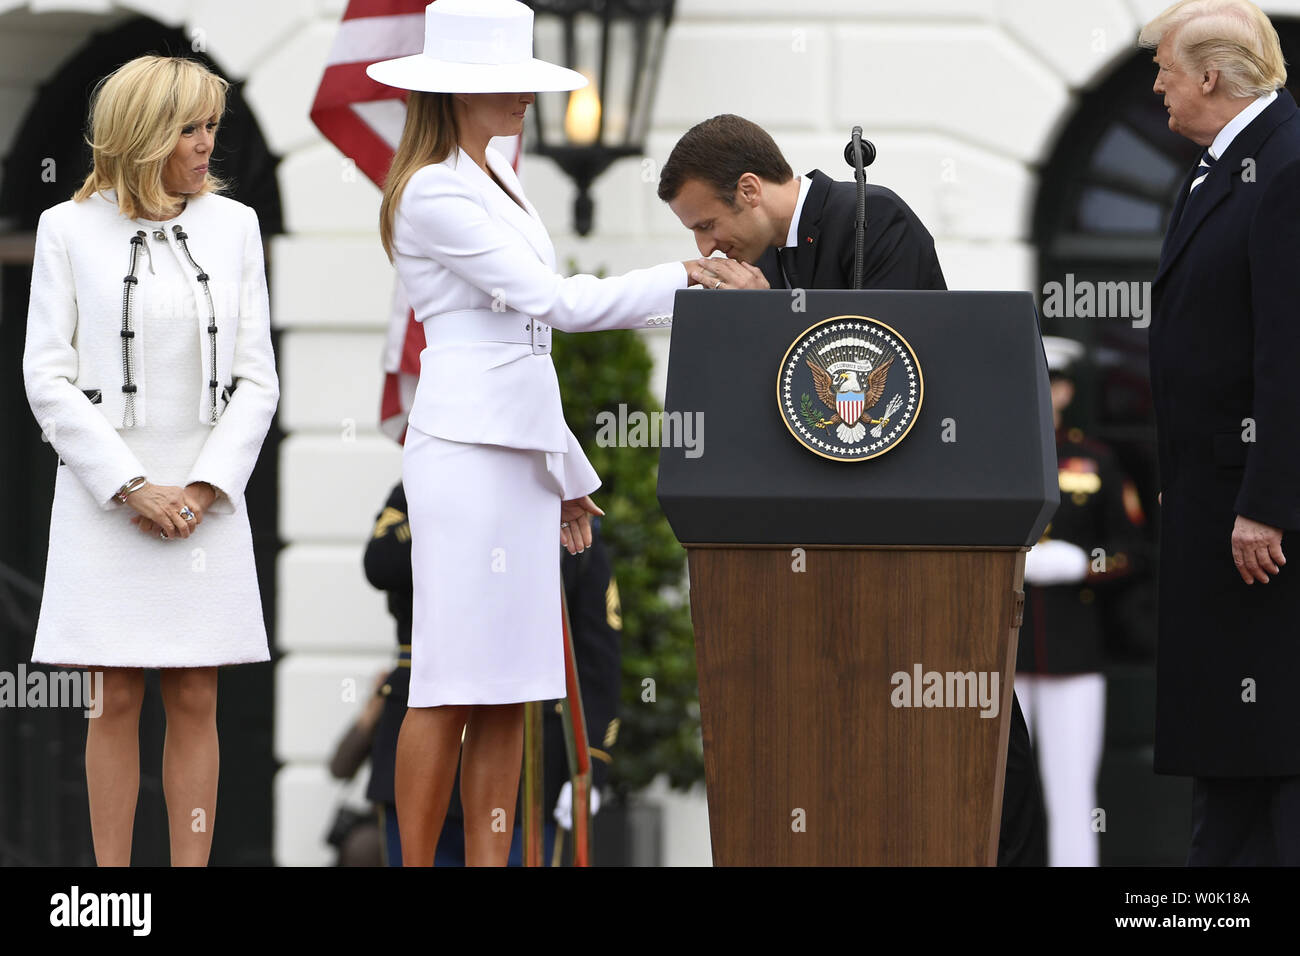 French President Emmanuel Macron kisses the hand of First Lady Melania  Trump as President Donald Trump (R) and Macron's wife Brigitte stand by at  the conclusion of State Visit welcoming remarks, at